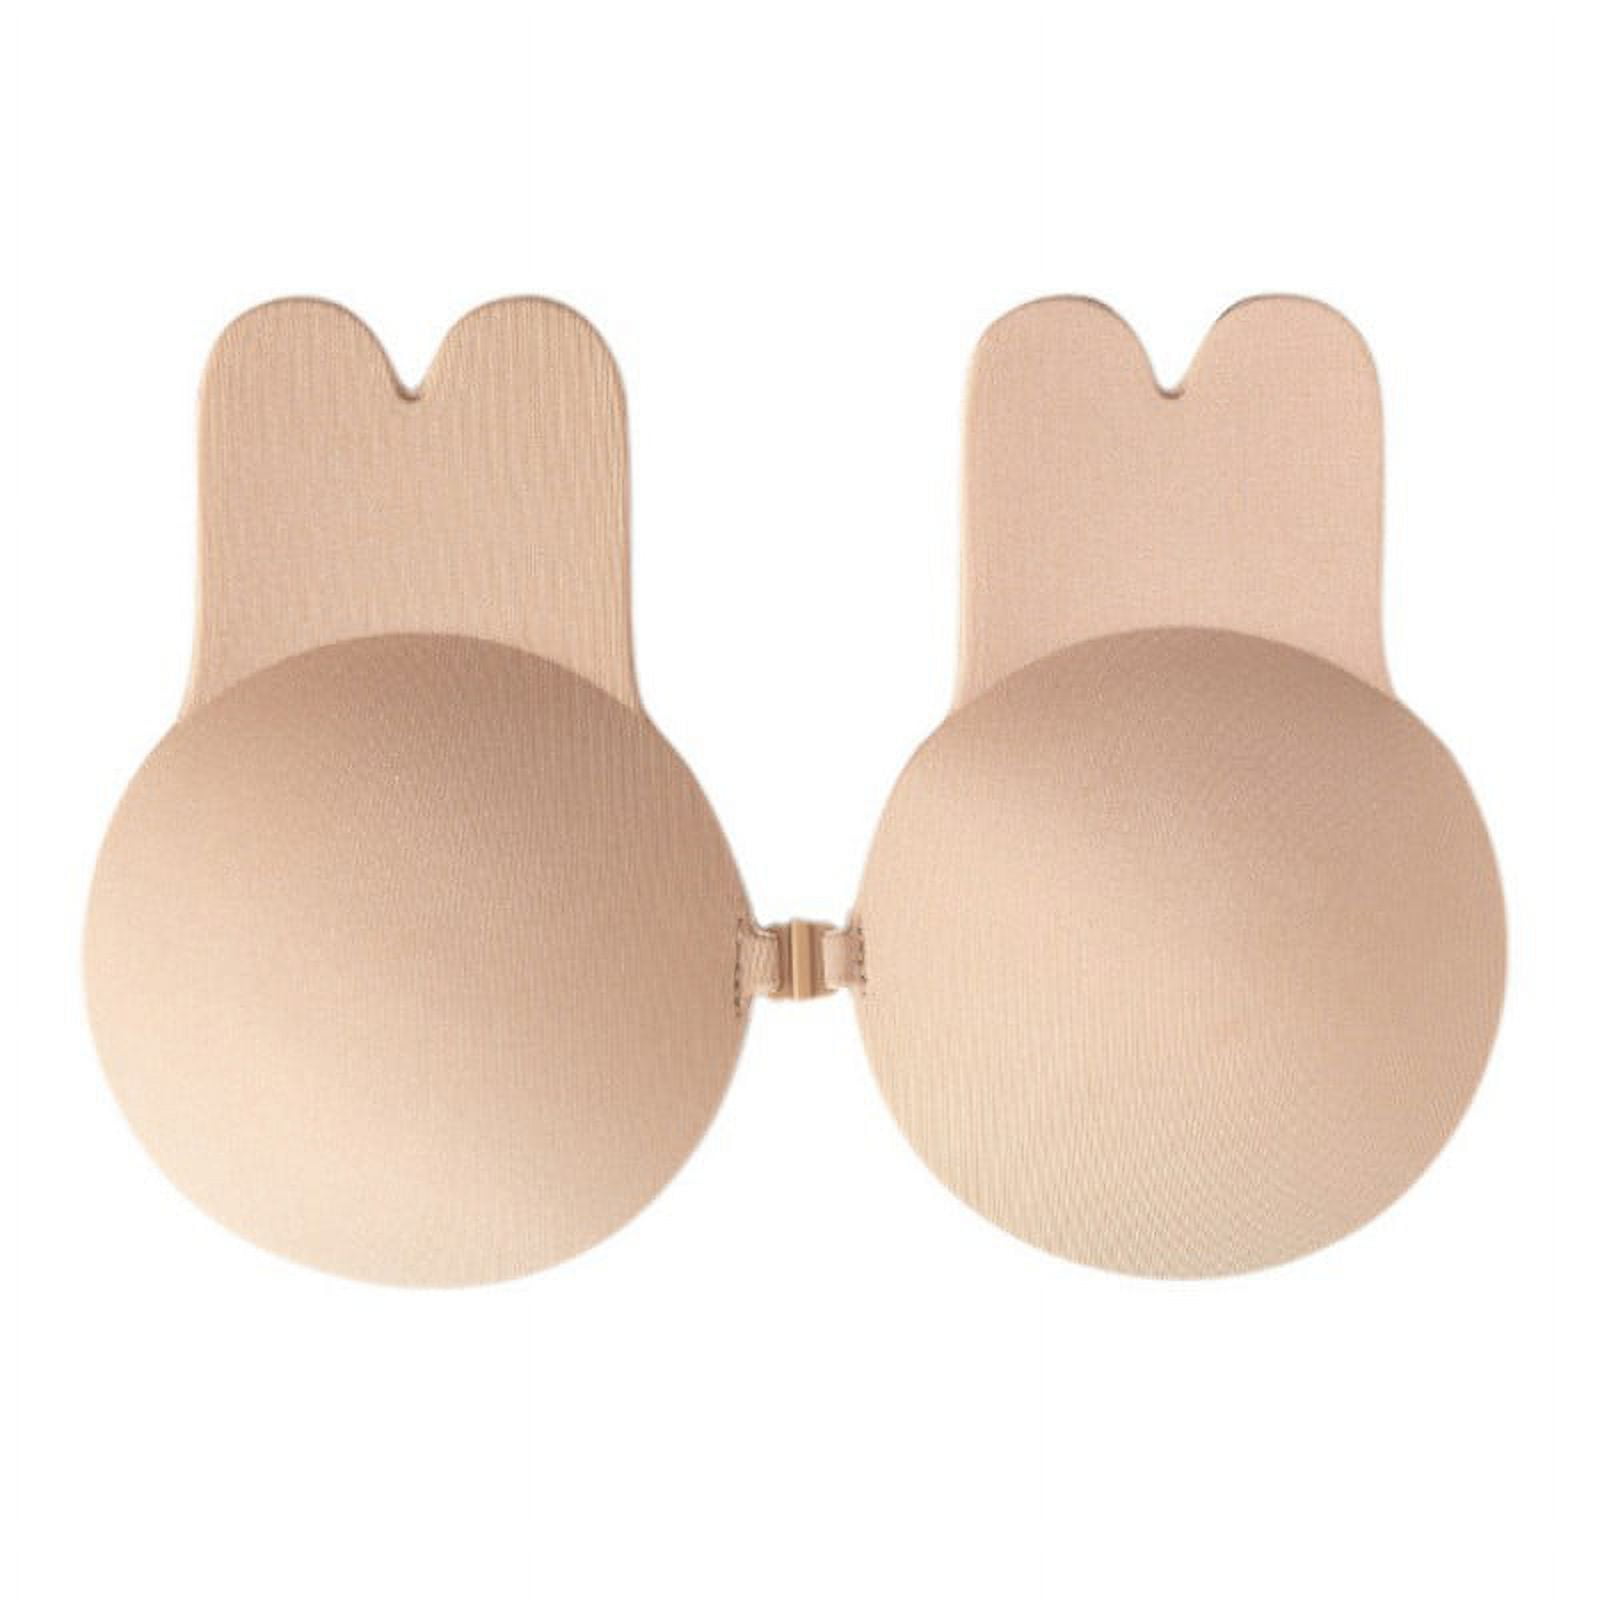 Breast Shapers